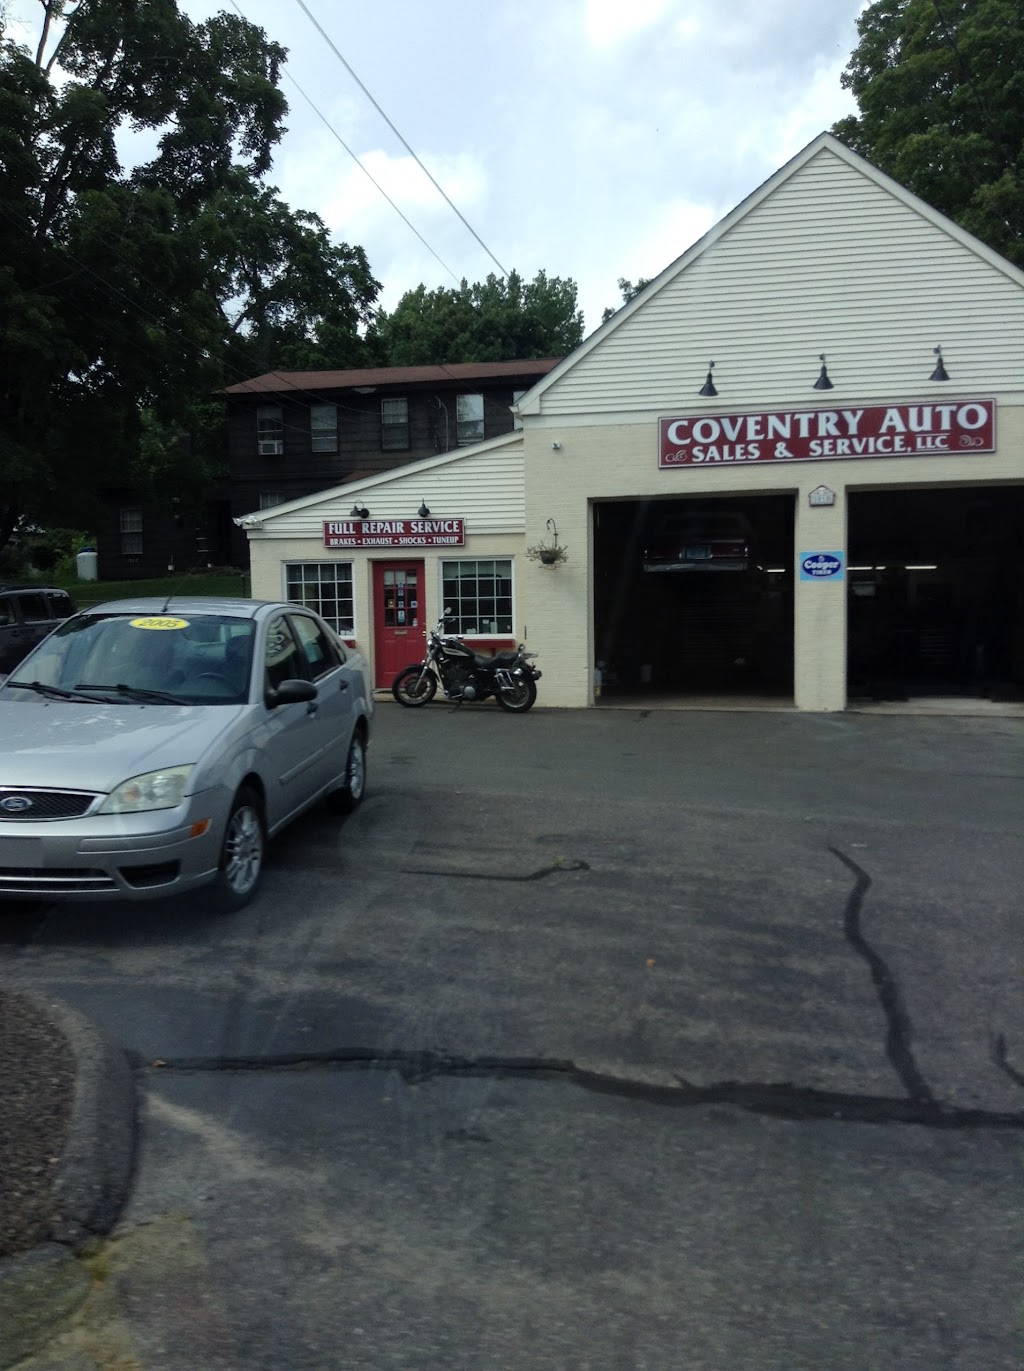 Coventry Auto Sales & Services LLC | 1010 Main St, Coventry, CT 06238 | Phone: (860) 742-6134